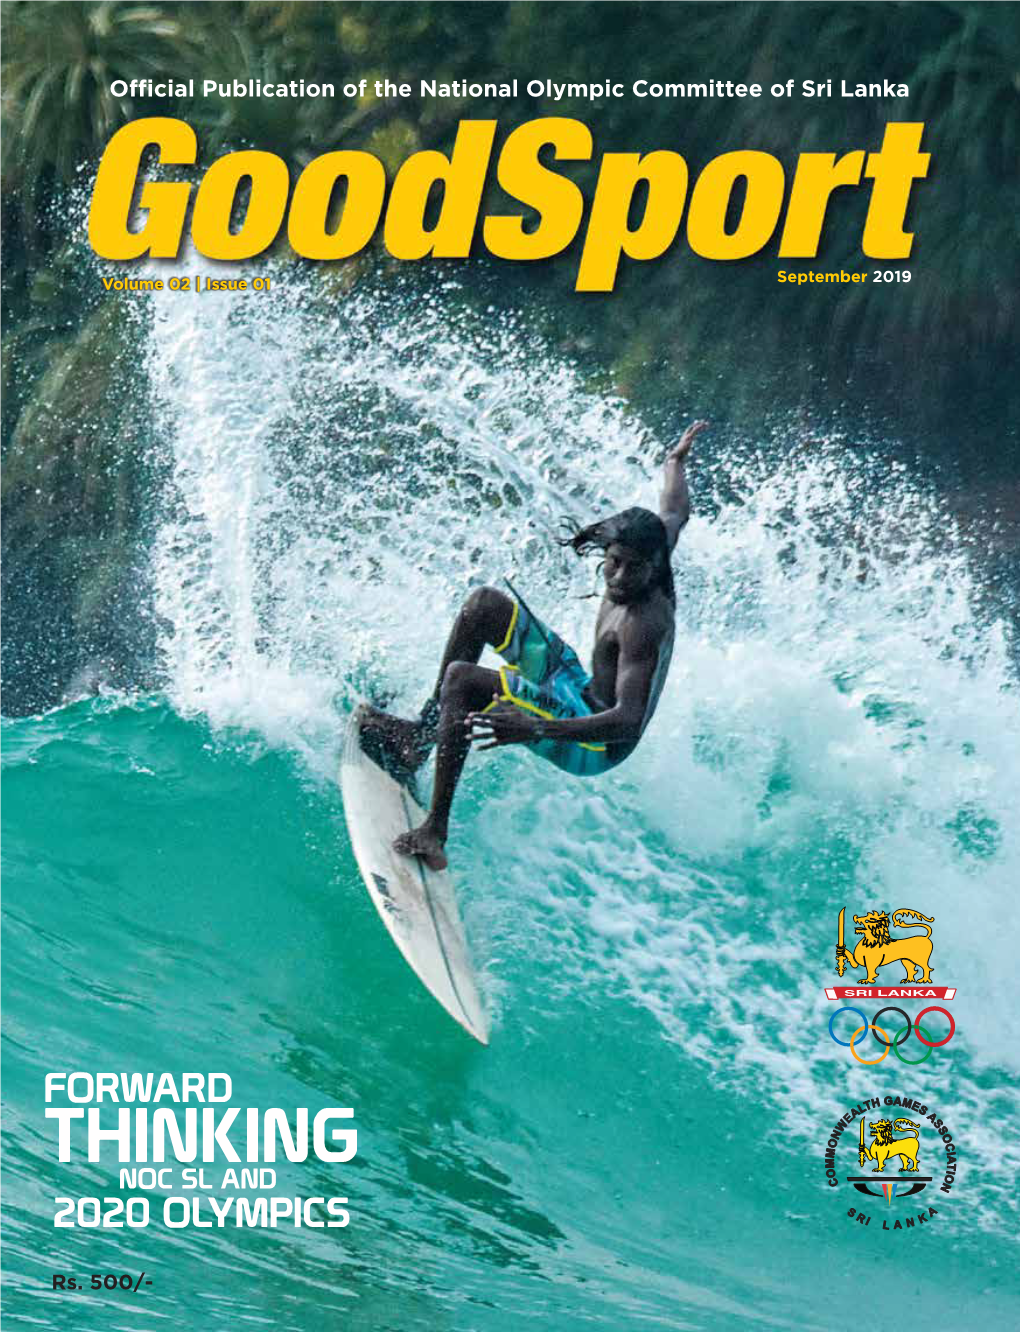 Goodsport Magazine with a Pledge As a Newly Elected President, I Was Forward March Under Sri Lanka’S Launched the First Environmental Audits Going On